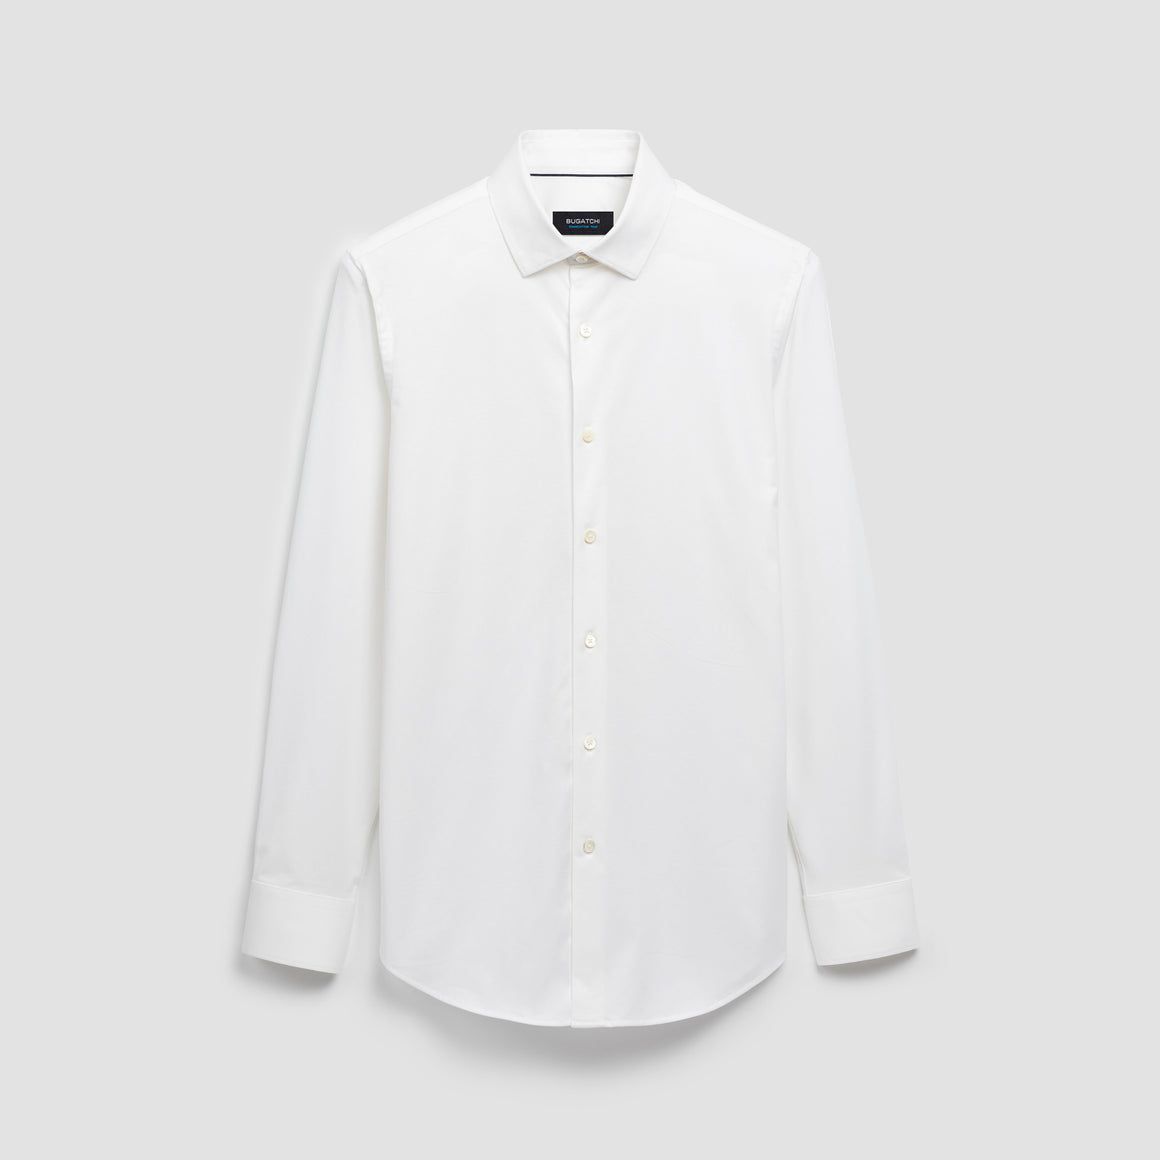 20 White Dress Shirts That Will Have You Looking Like a CEO